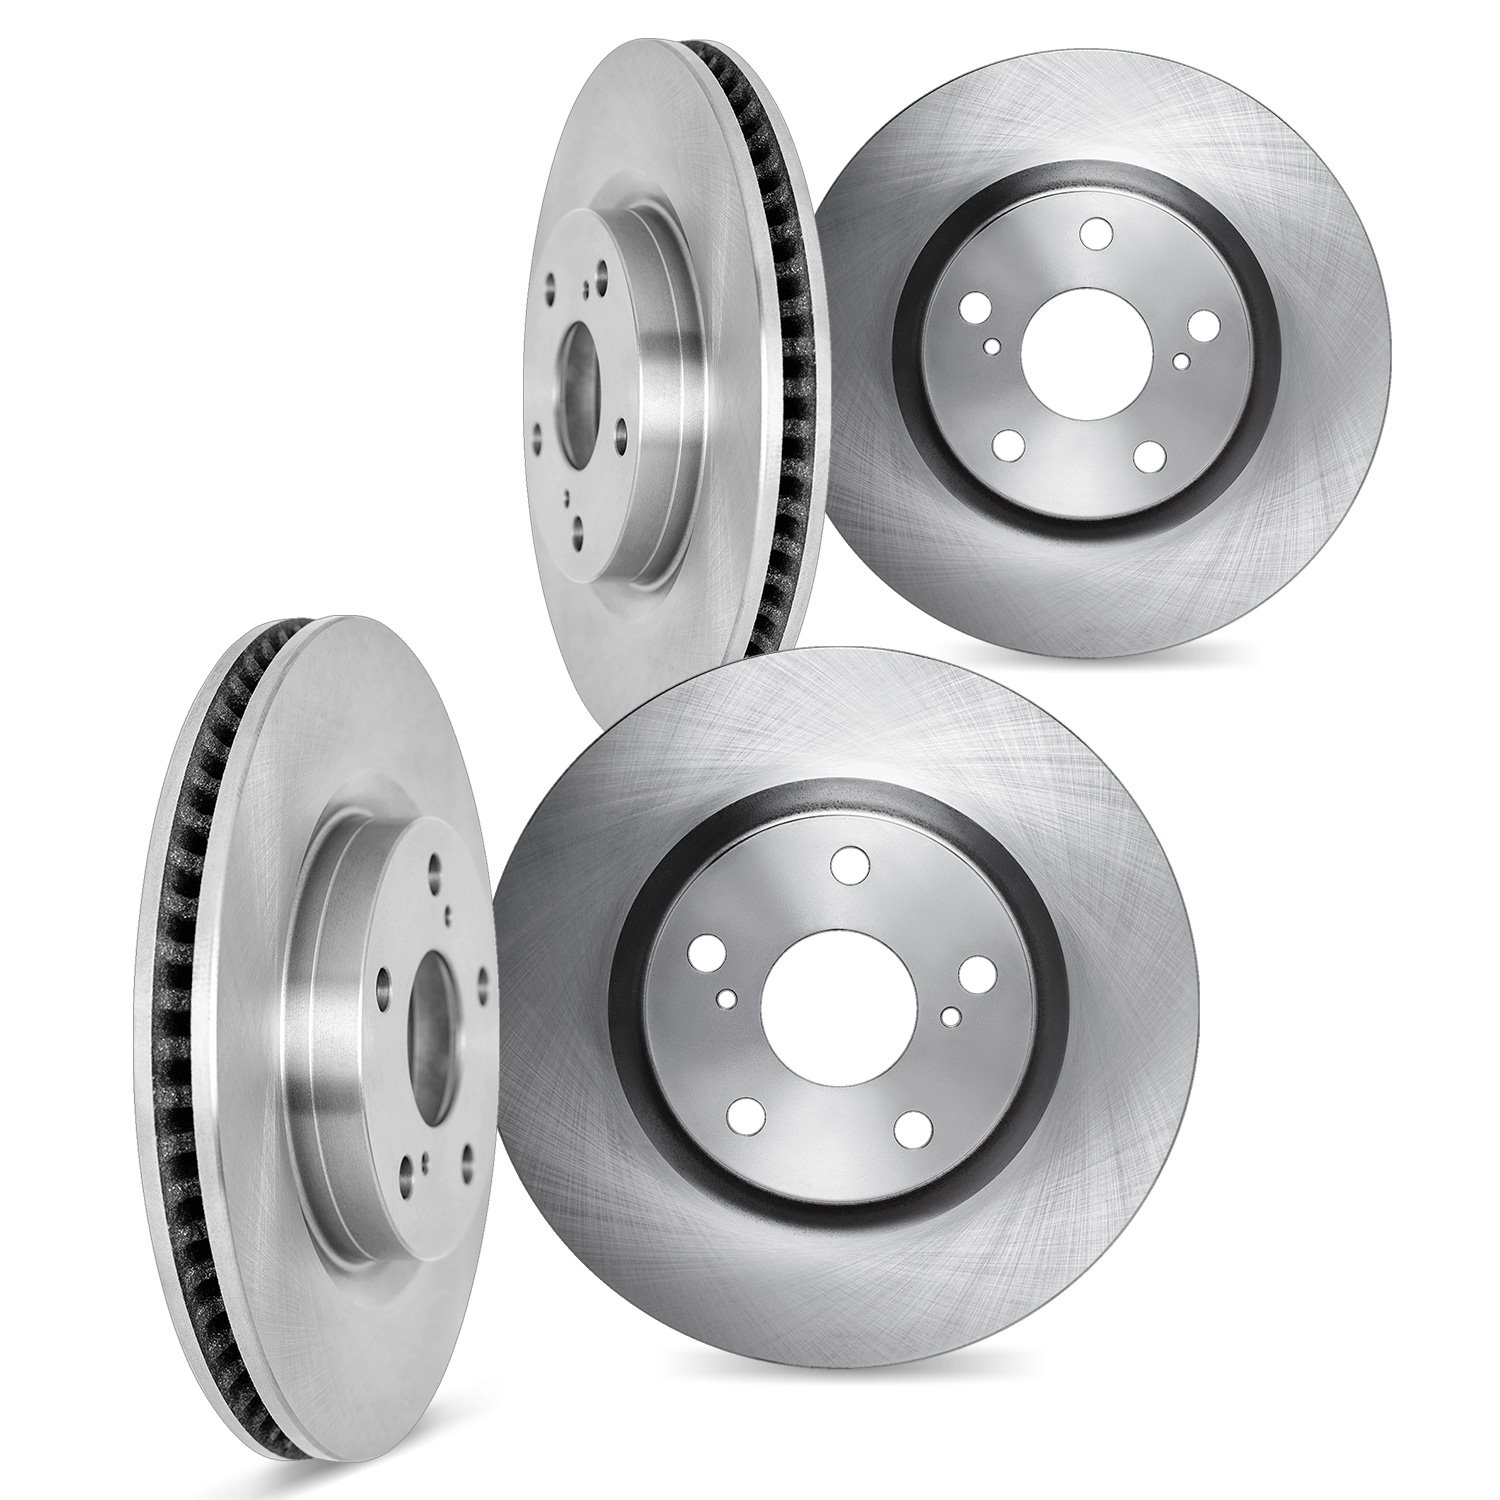 6004-67068 Brake Rotors, Fits Select Infiniti/Nissan, Position: Front and Rear